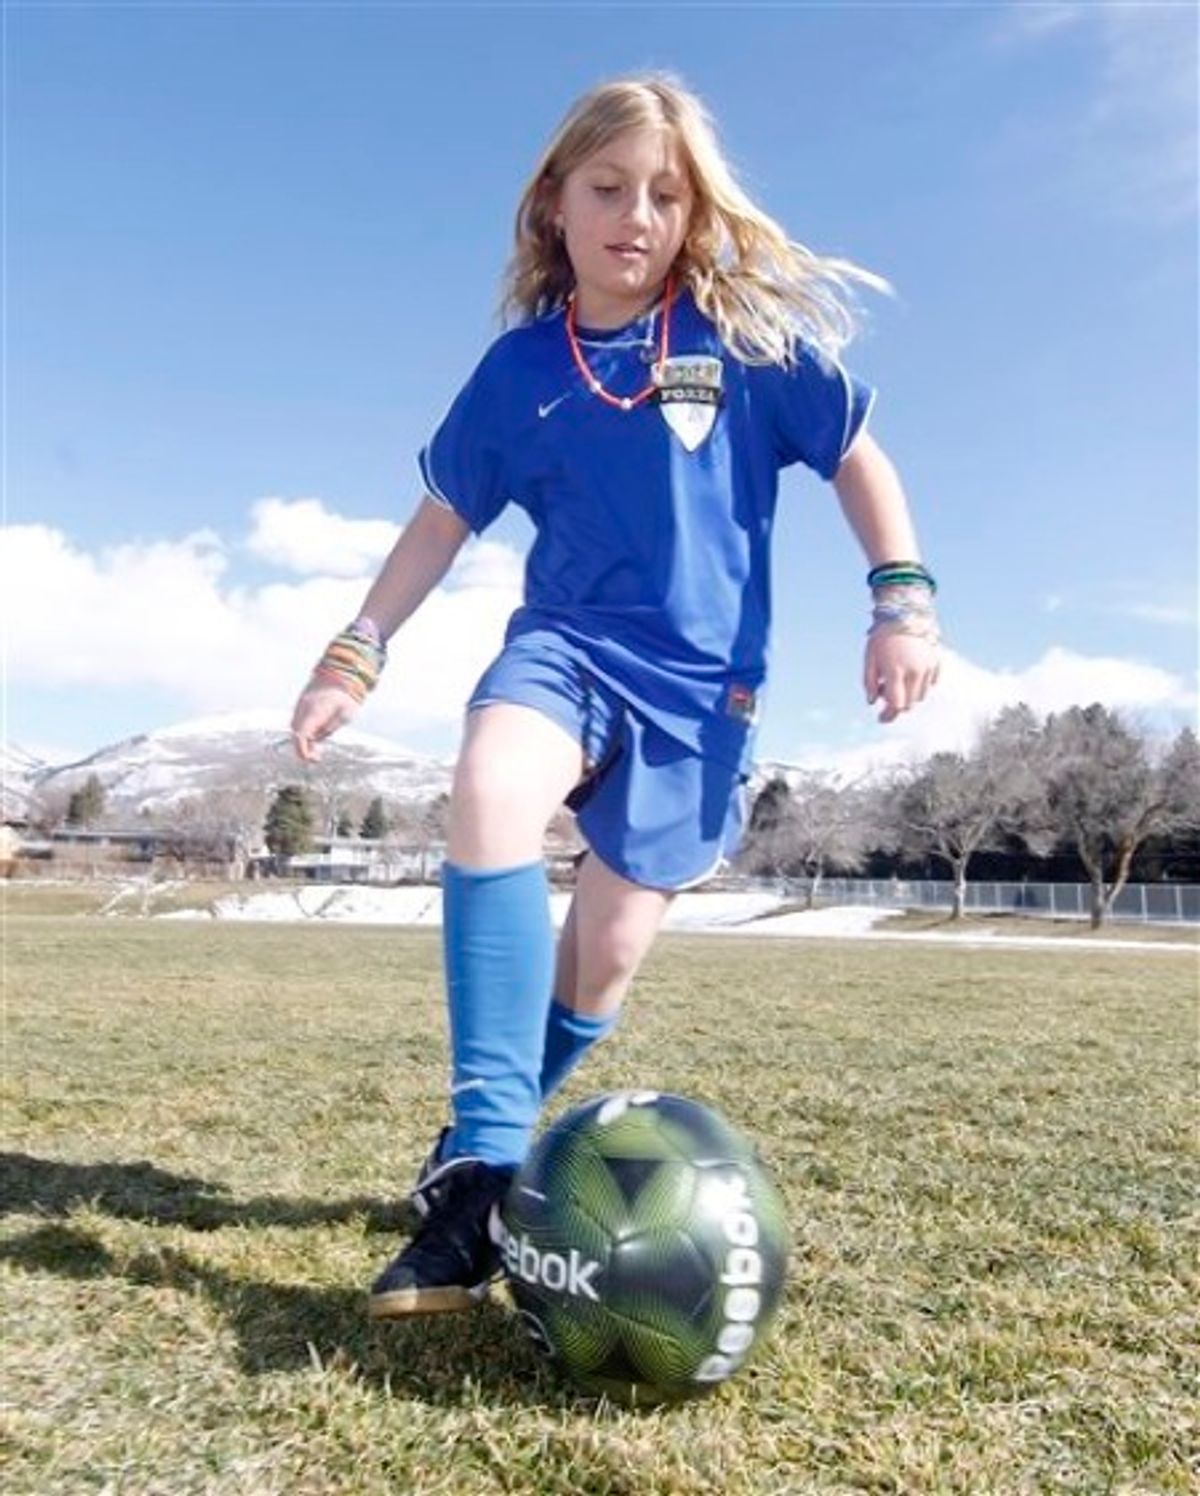 In this March 4, 20011 photo, Elizabeth Marston practices soccer at a school in Bountiful, Utah. Bradley Marston bought a genetic test online a year ago for his daughter Elizabeth, then 9, that showed she has an advantageous gene form for sports_ results her father hopes will help her get into elite sports programs or win a sports scholarship to college. (AP Photo/George Frey) (AP)